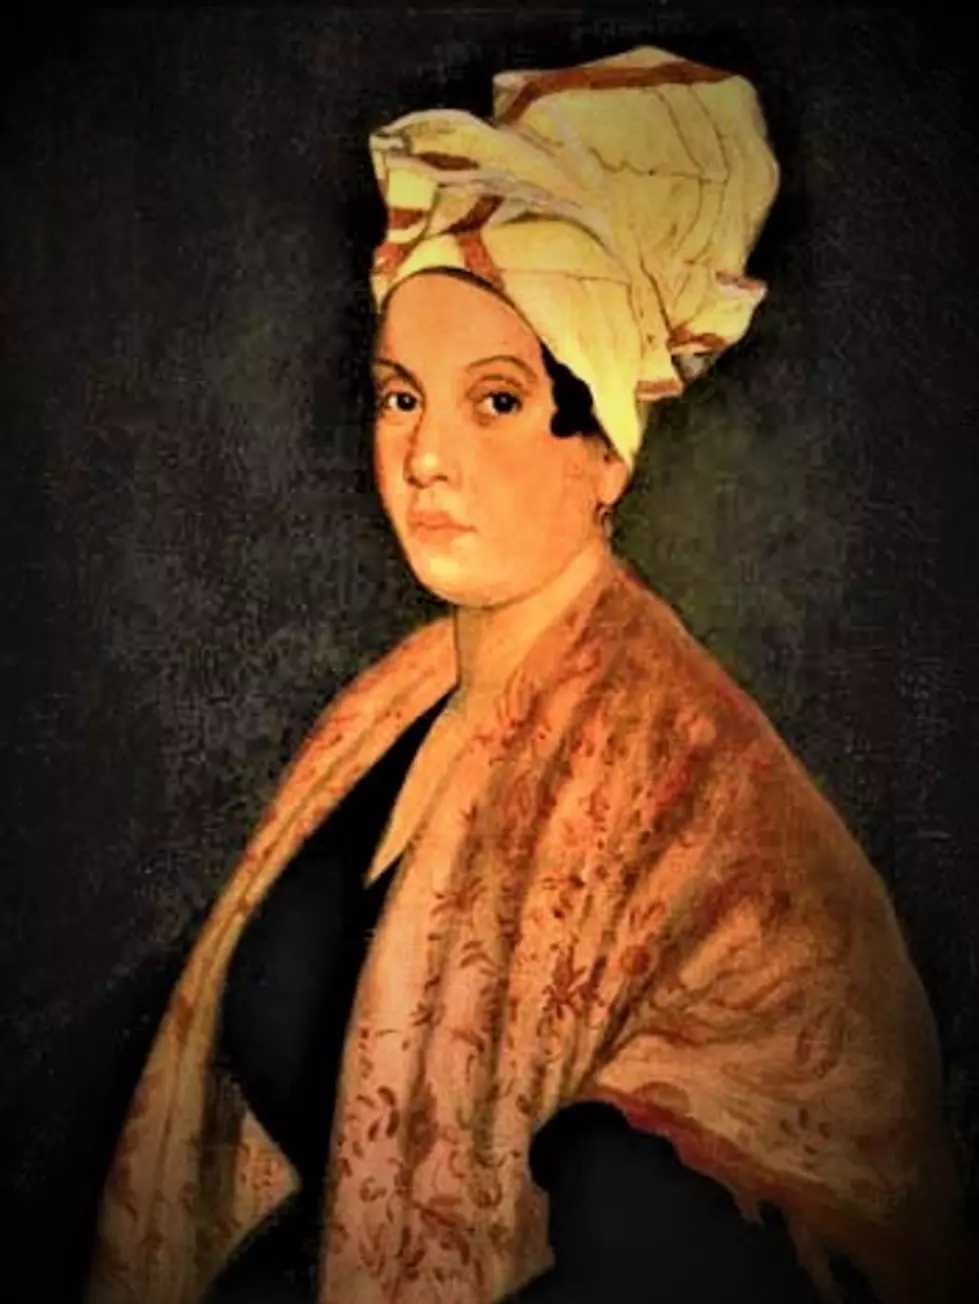 Marie Laveau Painting Sells for Almost $1 Million but, it’s Probably Not Even Her